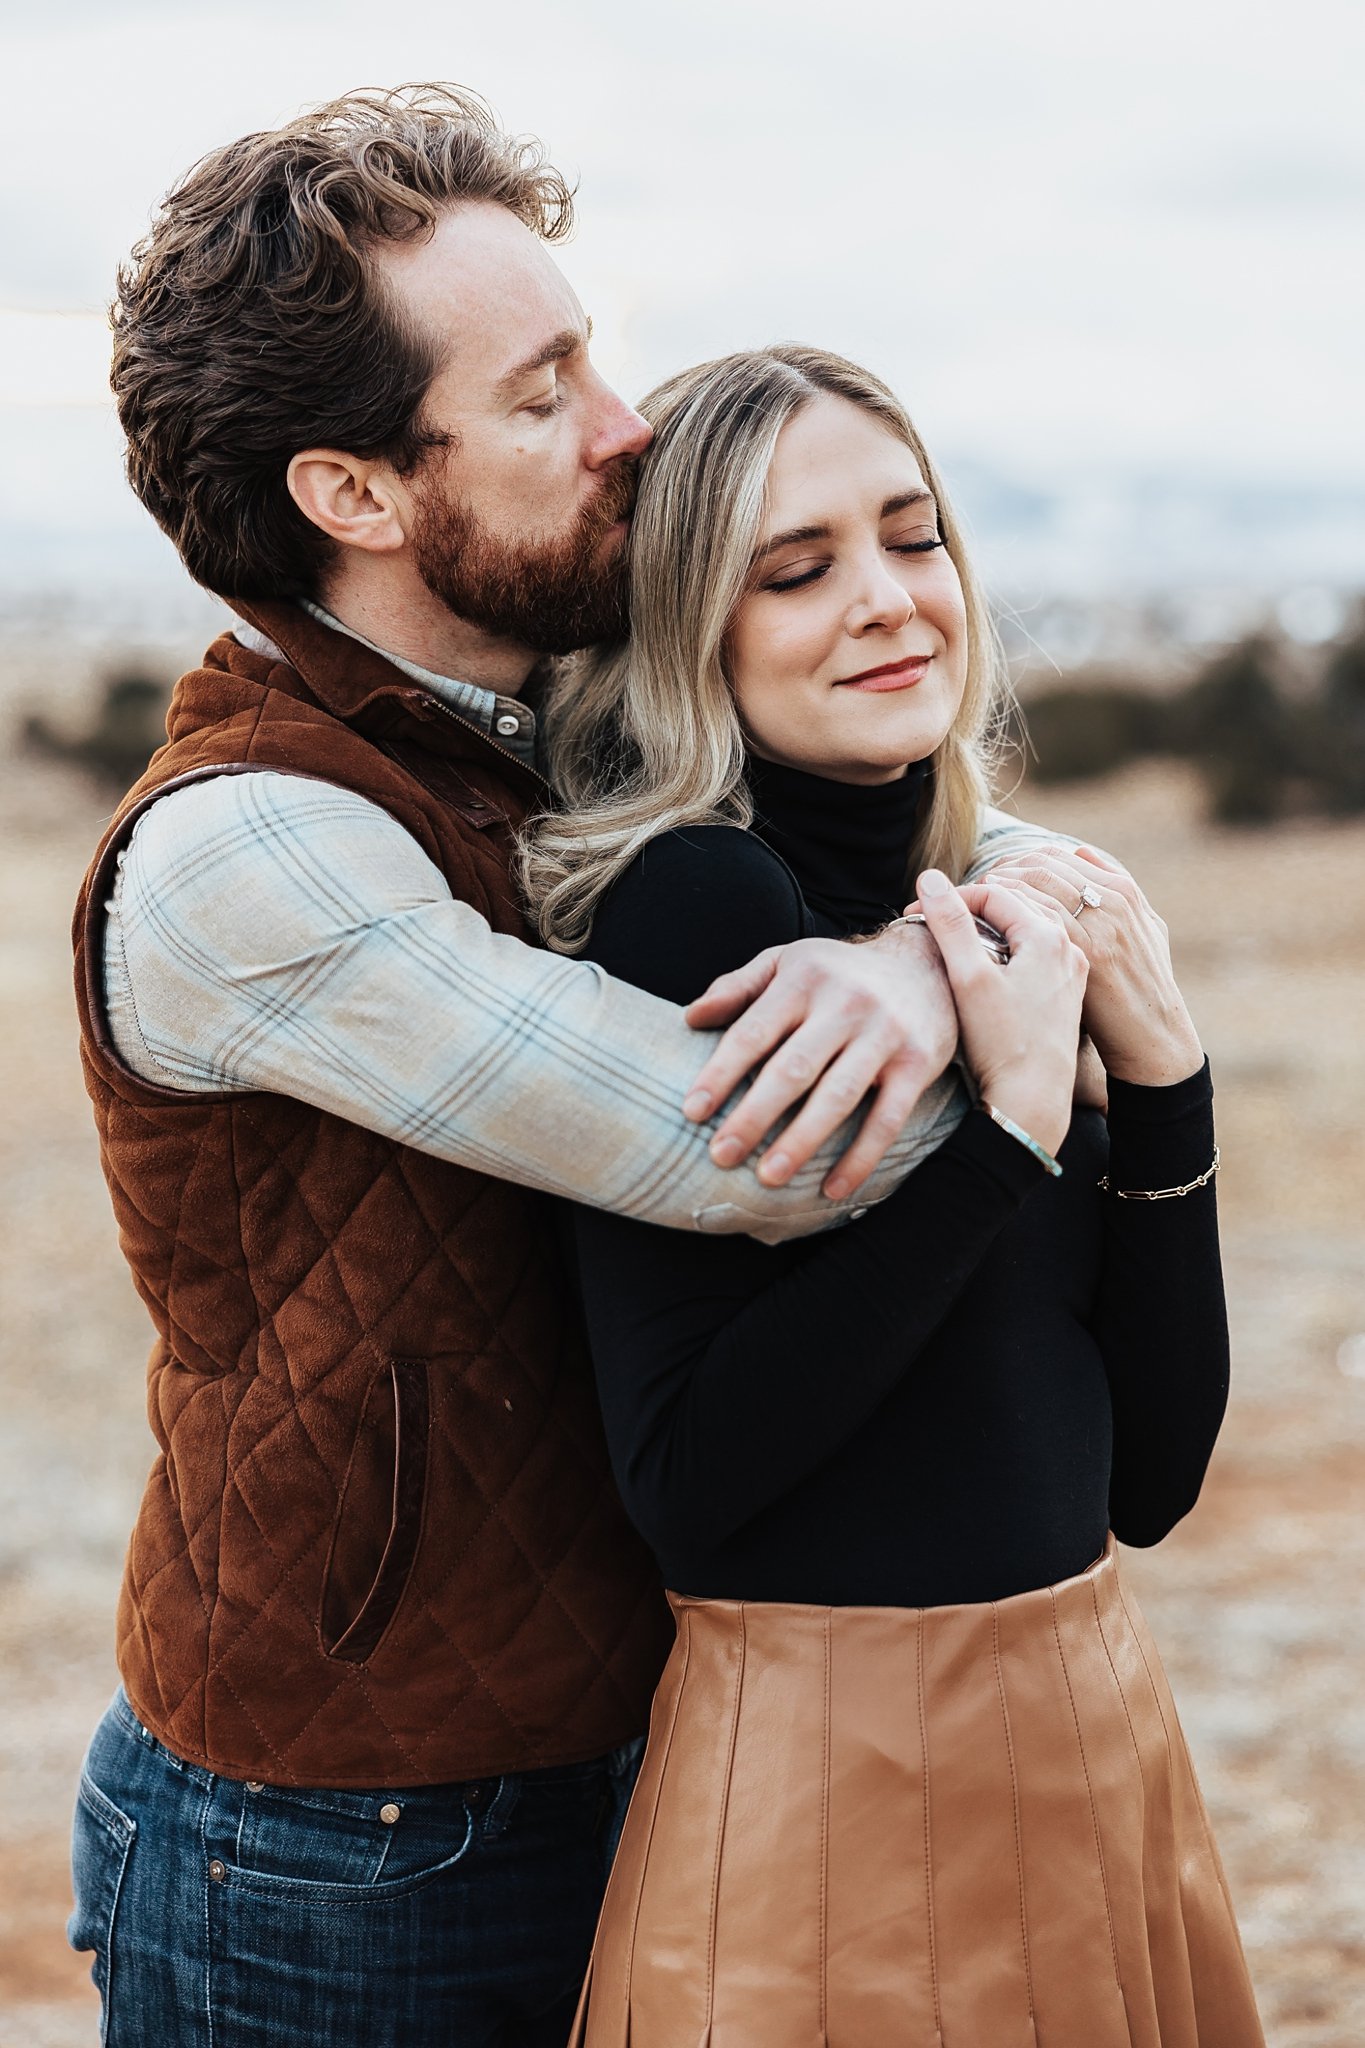 Alicia+lucia+photography+-+albuquerque+wedding+photographer+-+santa+fe+wedding+photography+-+new+mexico+wedding+photographer+-+new+mexico+wedding+-+southwest+engagement+-+ghost+ranch+engagement+-+ghost+ranch+wedding_0078.jpg